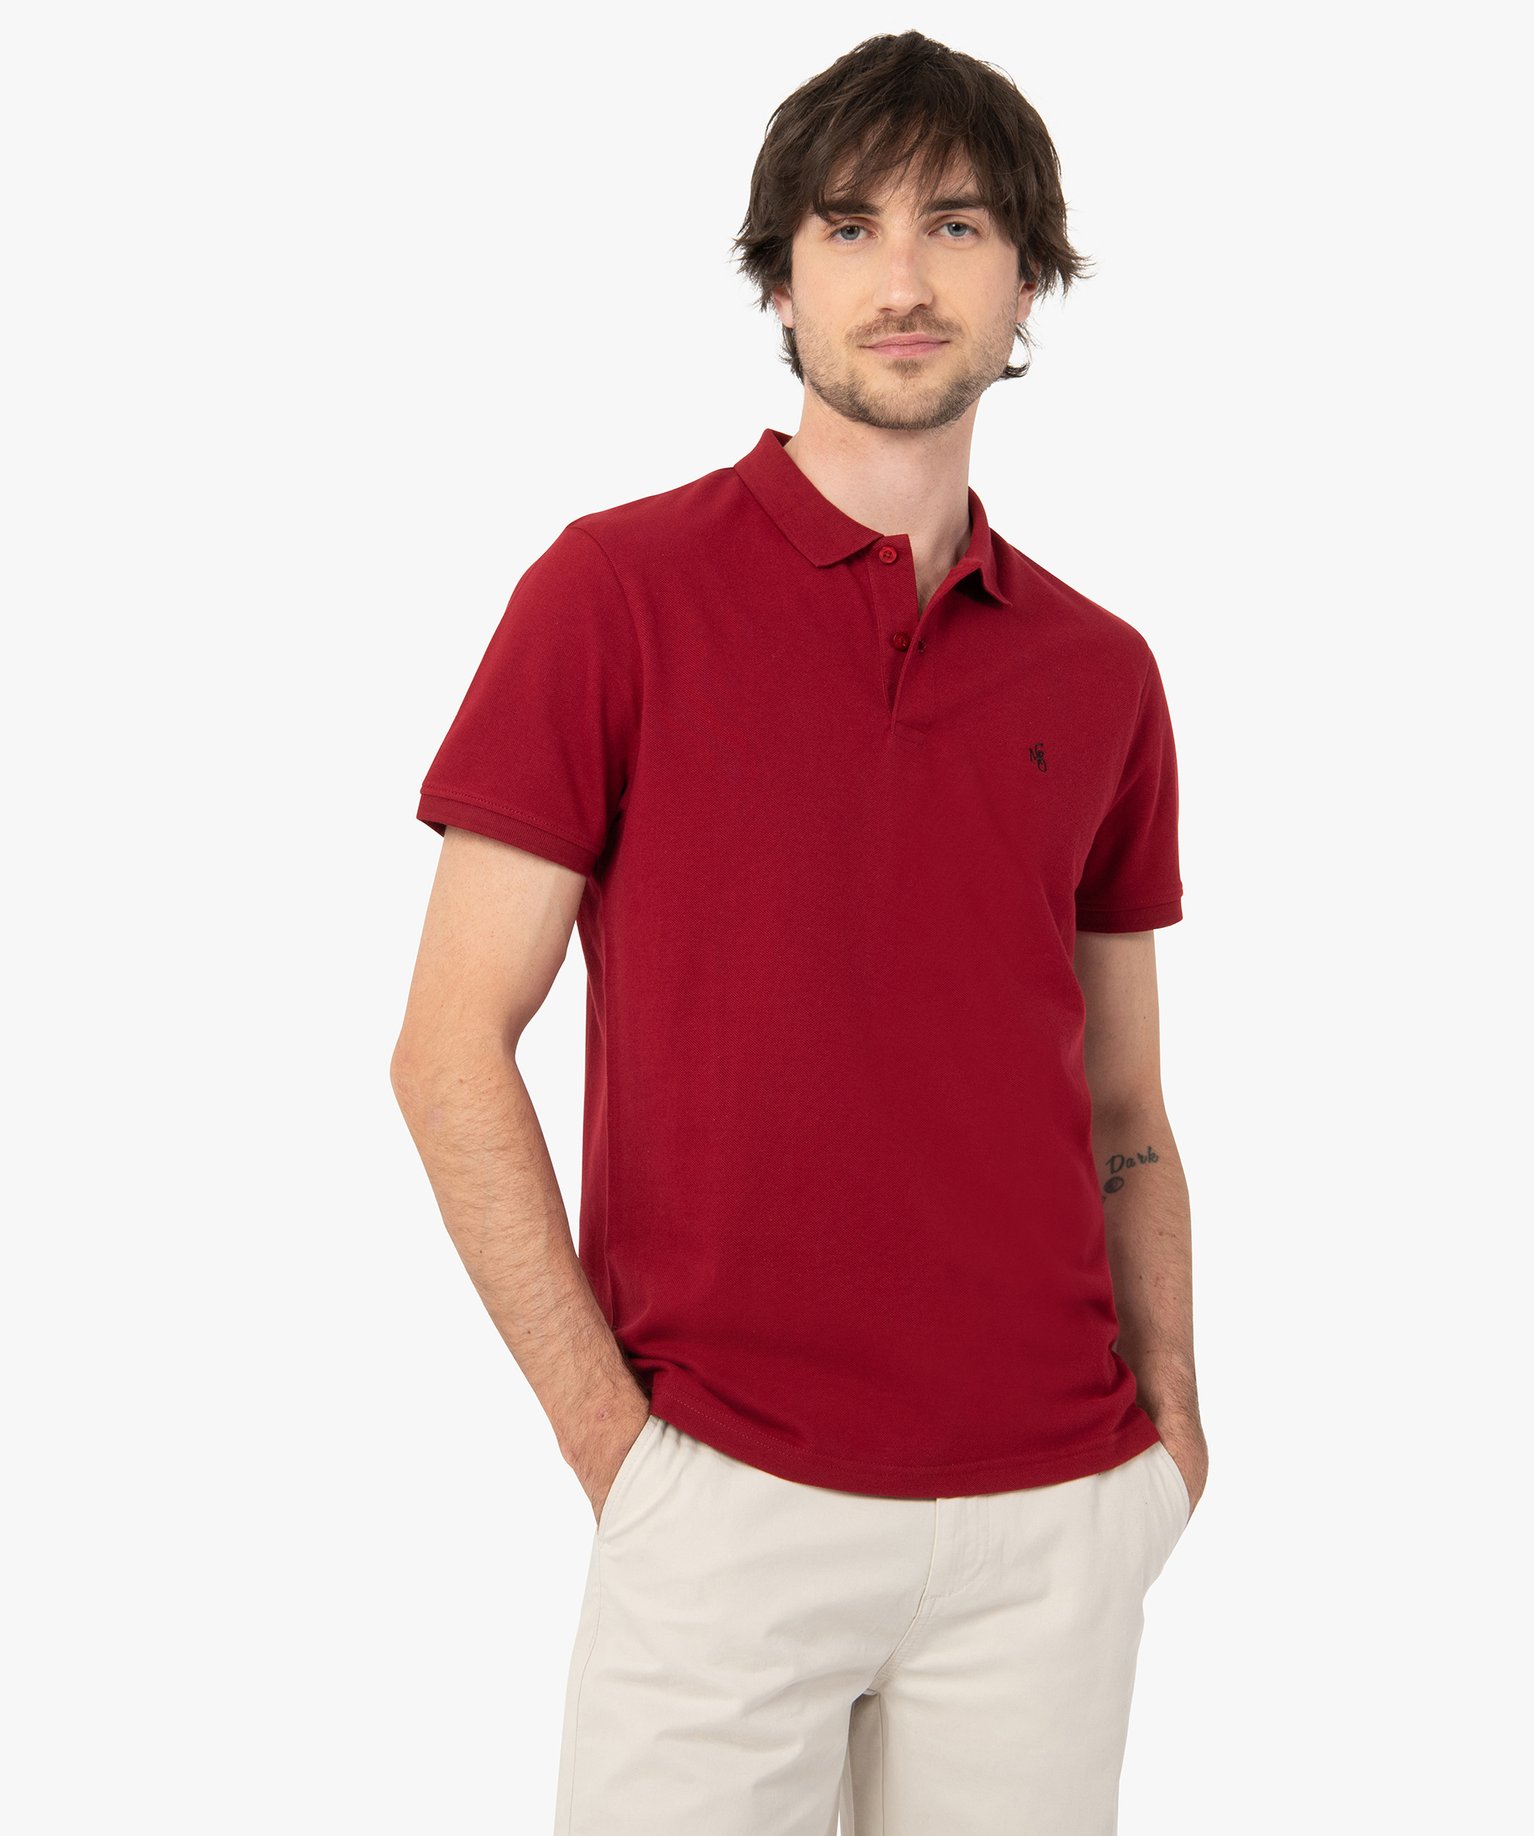 polo homme a manches courtes en maille piquee rouge polos